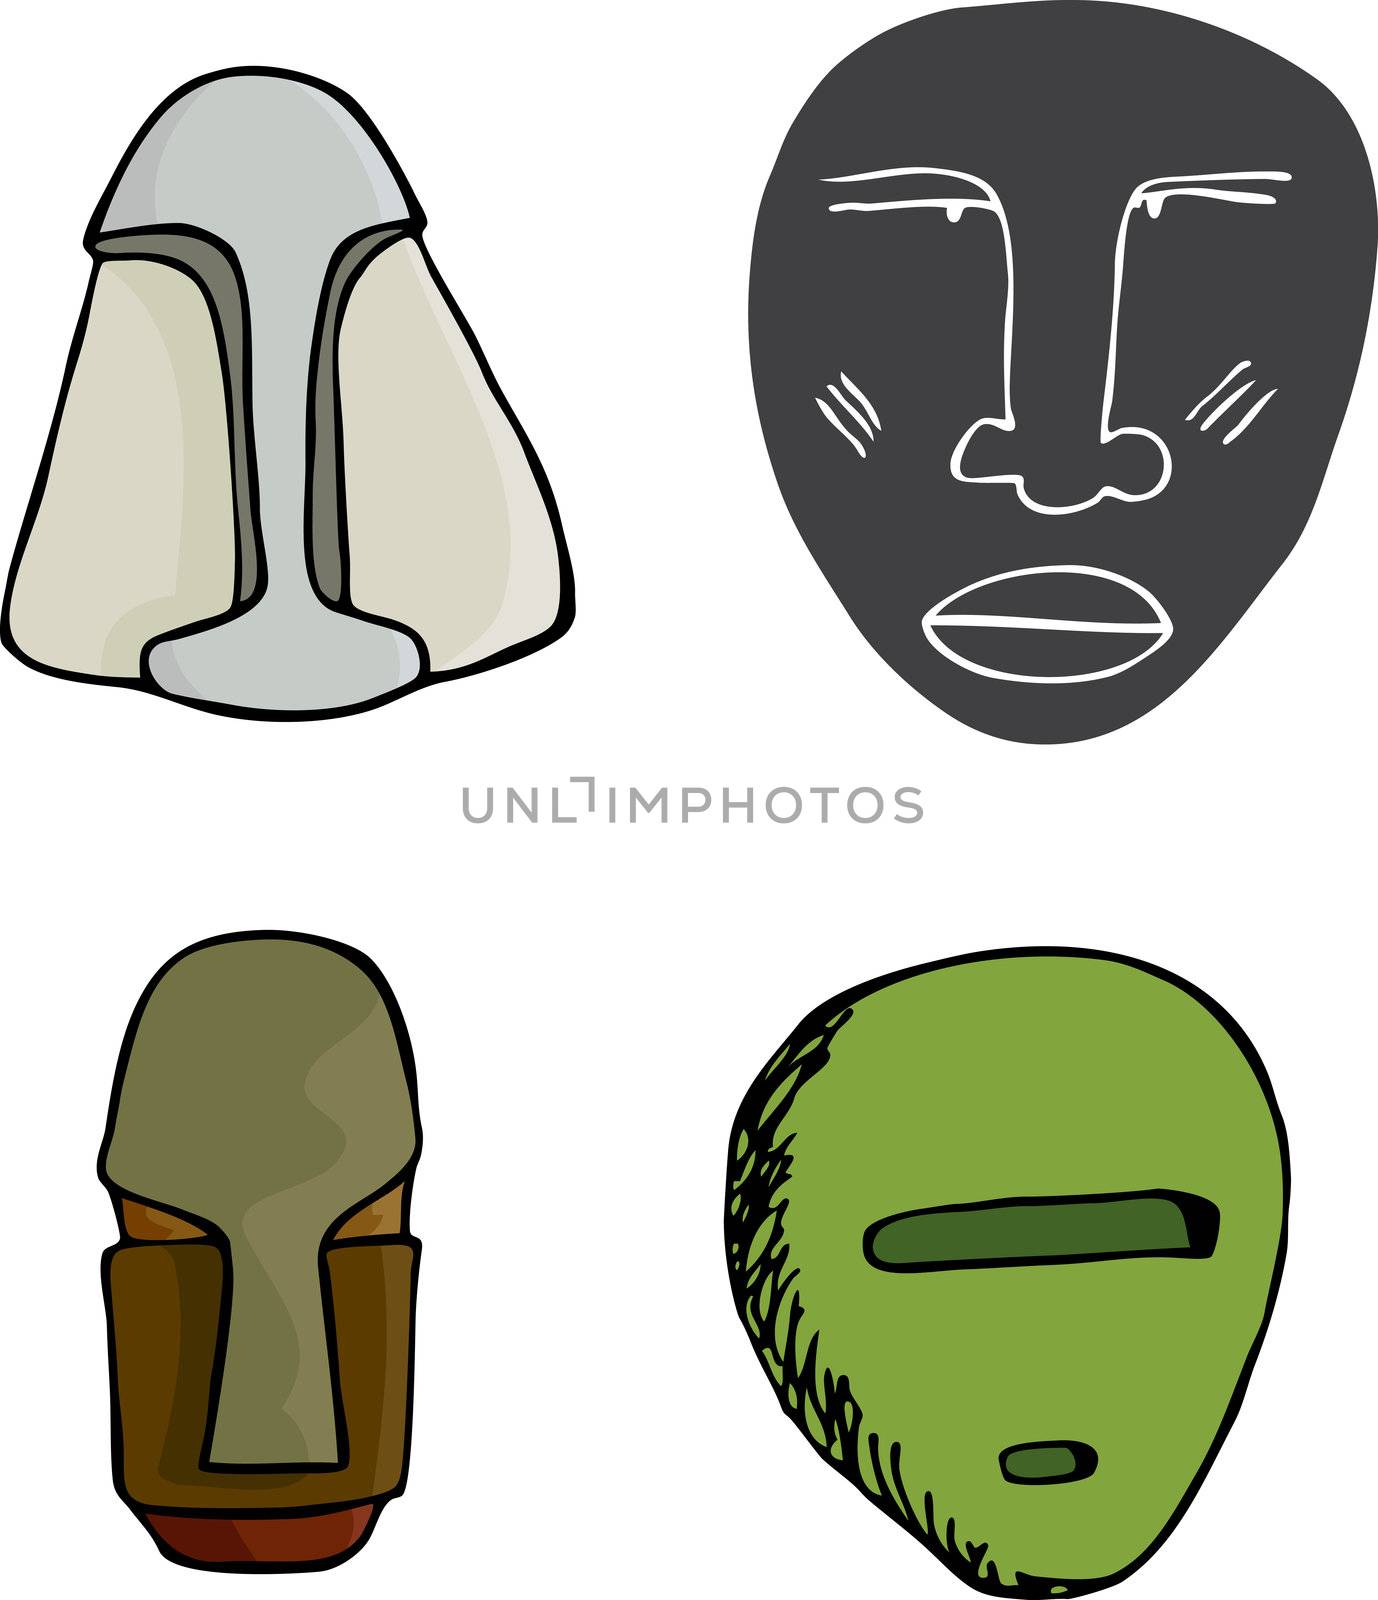 Four ancient science fiction mask illustions over white